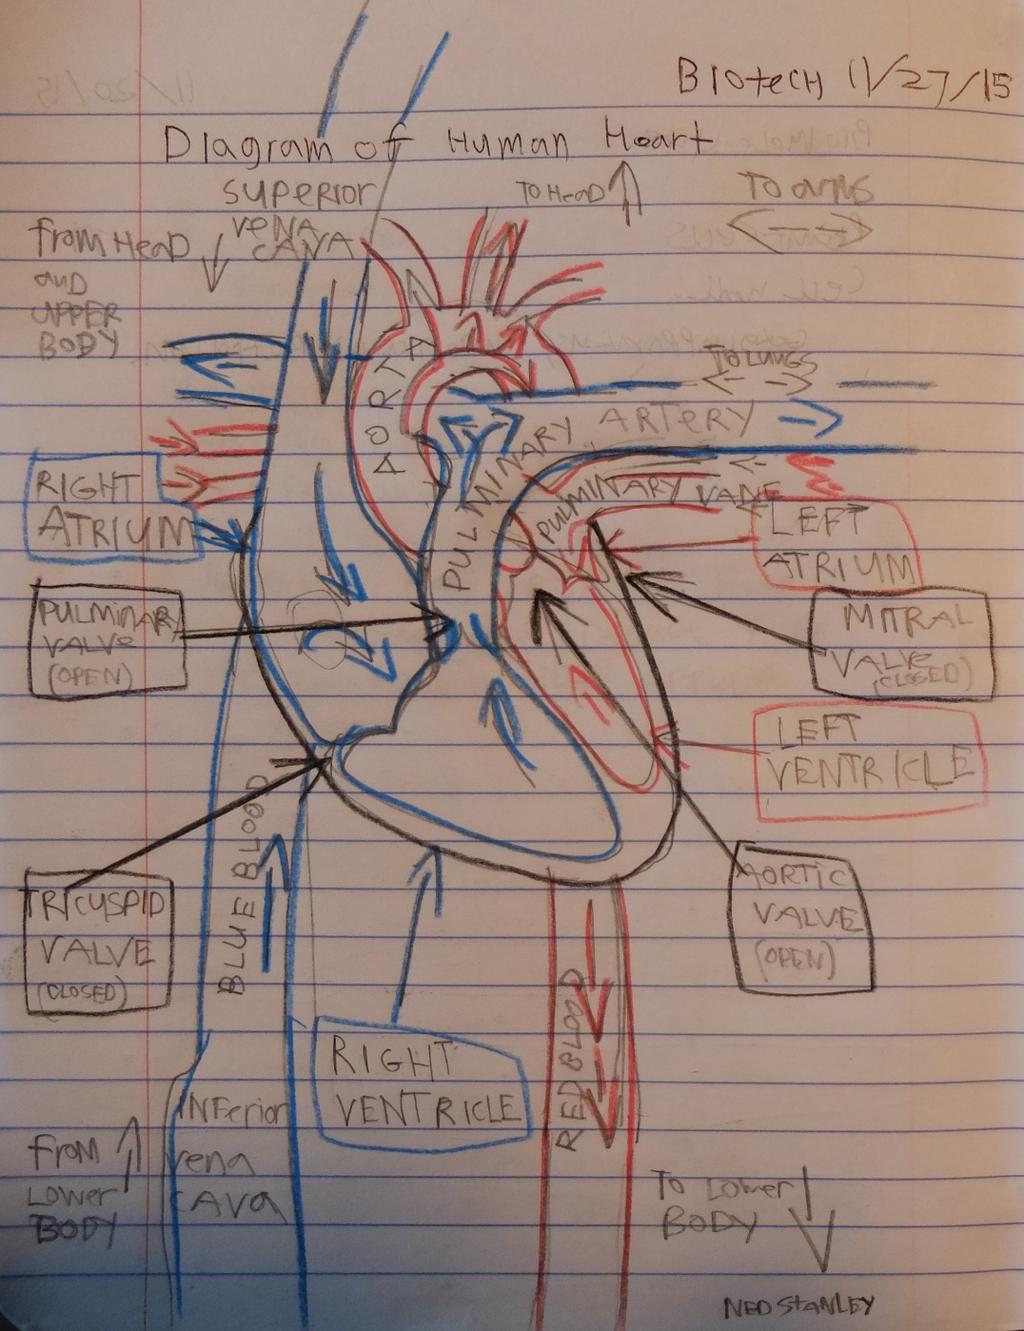 Dissection of a Heart The human heart is divided into four chambers: Right Atrium, Right Ventricle, Left Atrium, and Left Ventricle.